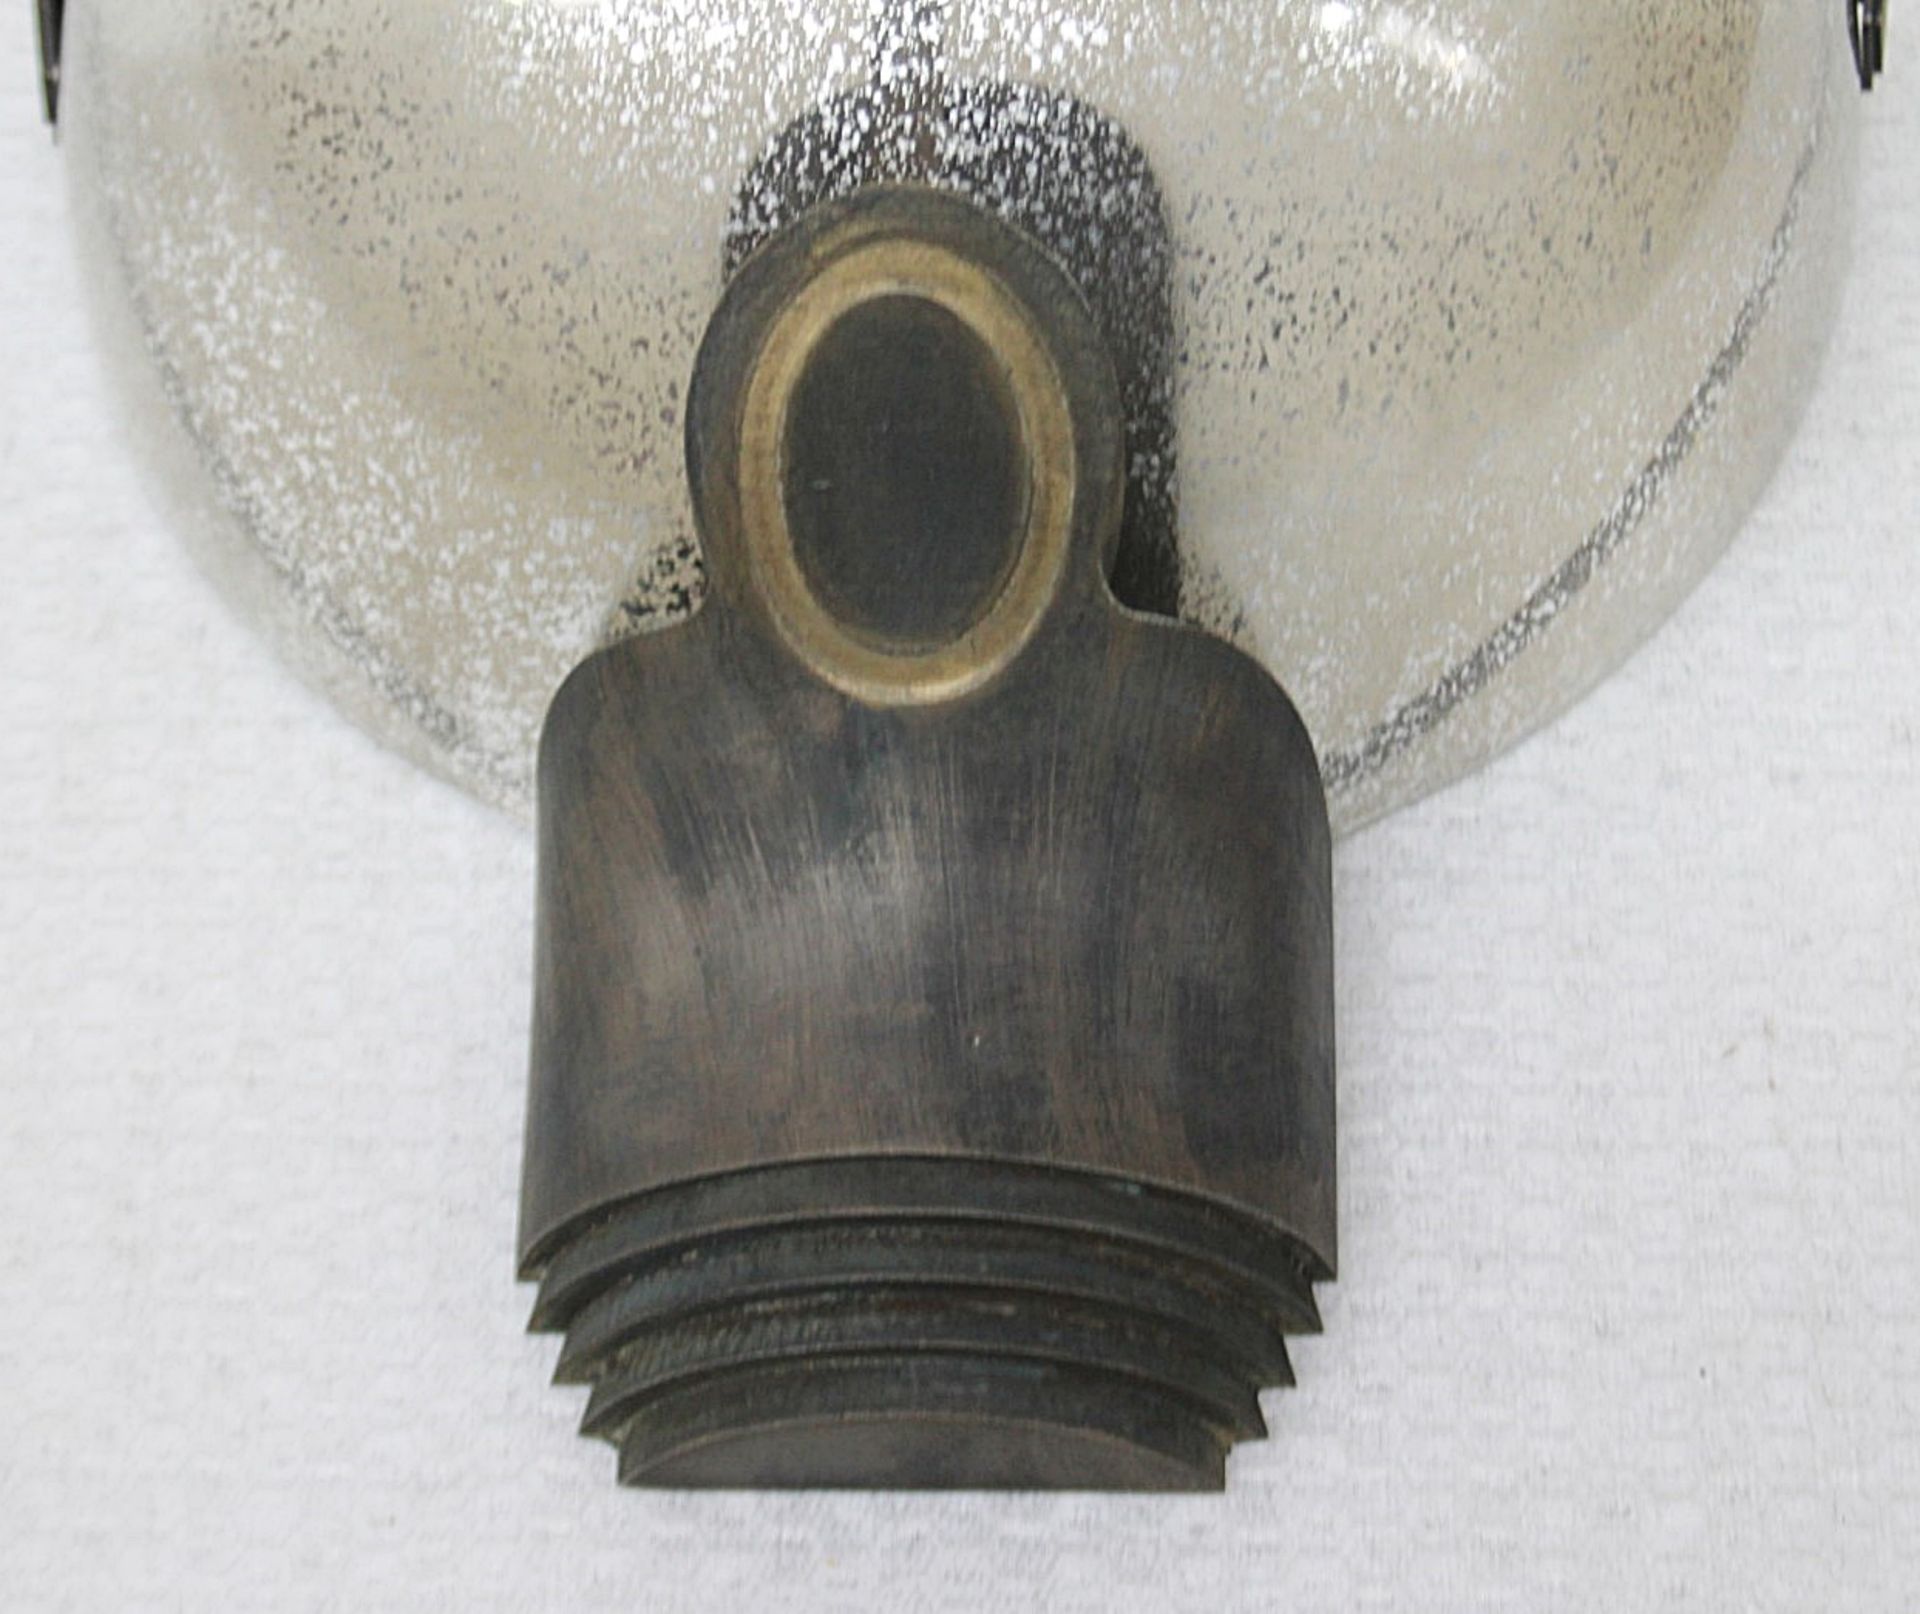 A Pair Of AGGIOLIGHT 'Collonade' Luxury Italian Deco-style Wall Sconce Light Fittings - Unused / - Image 3 of 5